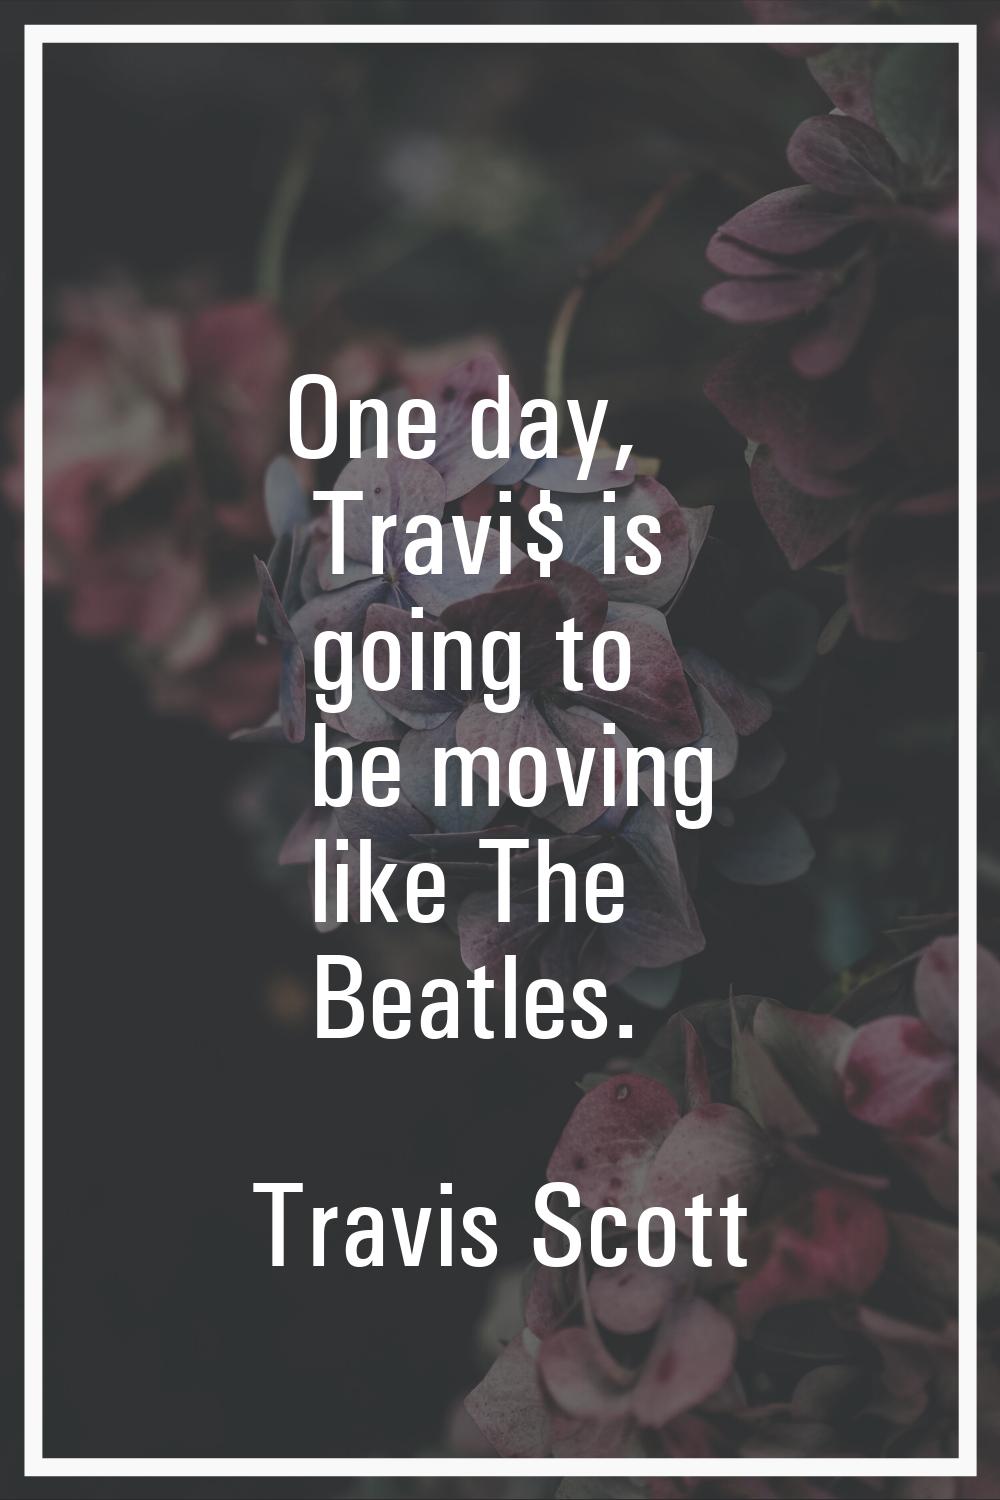 One day, Travi$ is going to be moving like The Beatles.